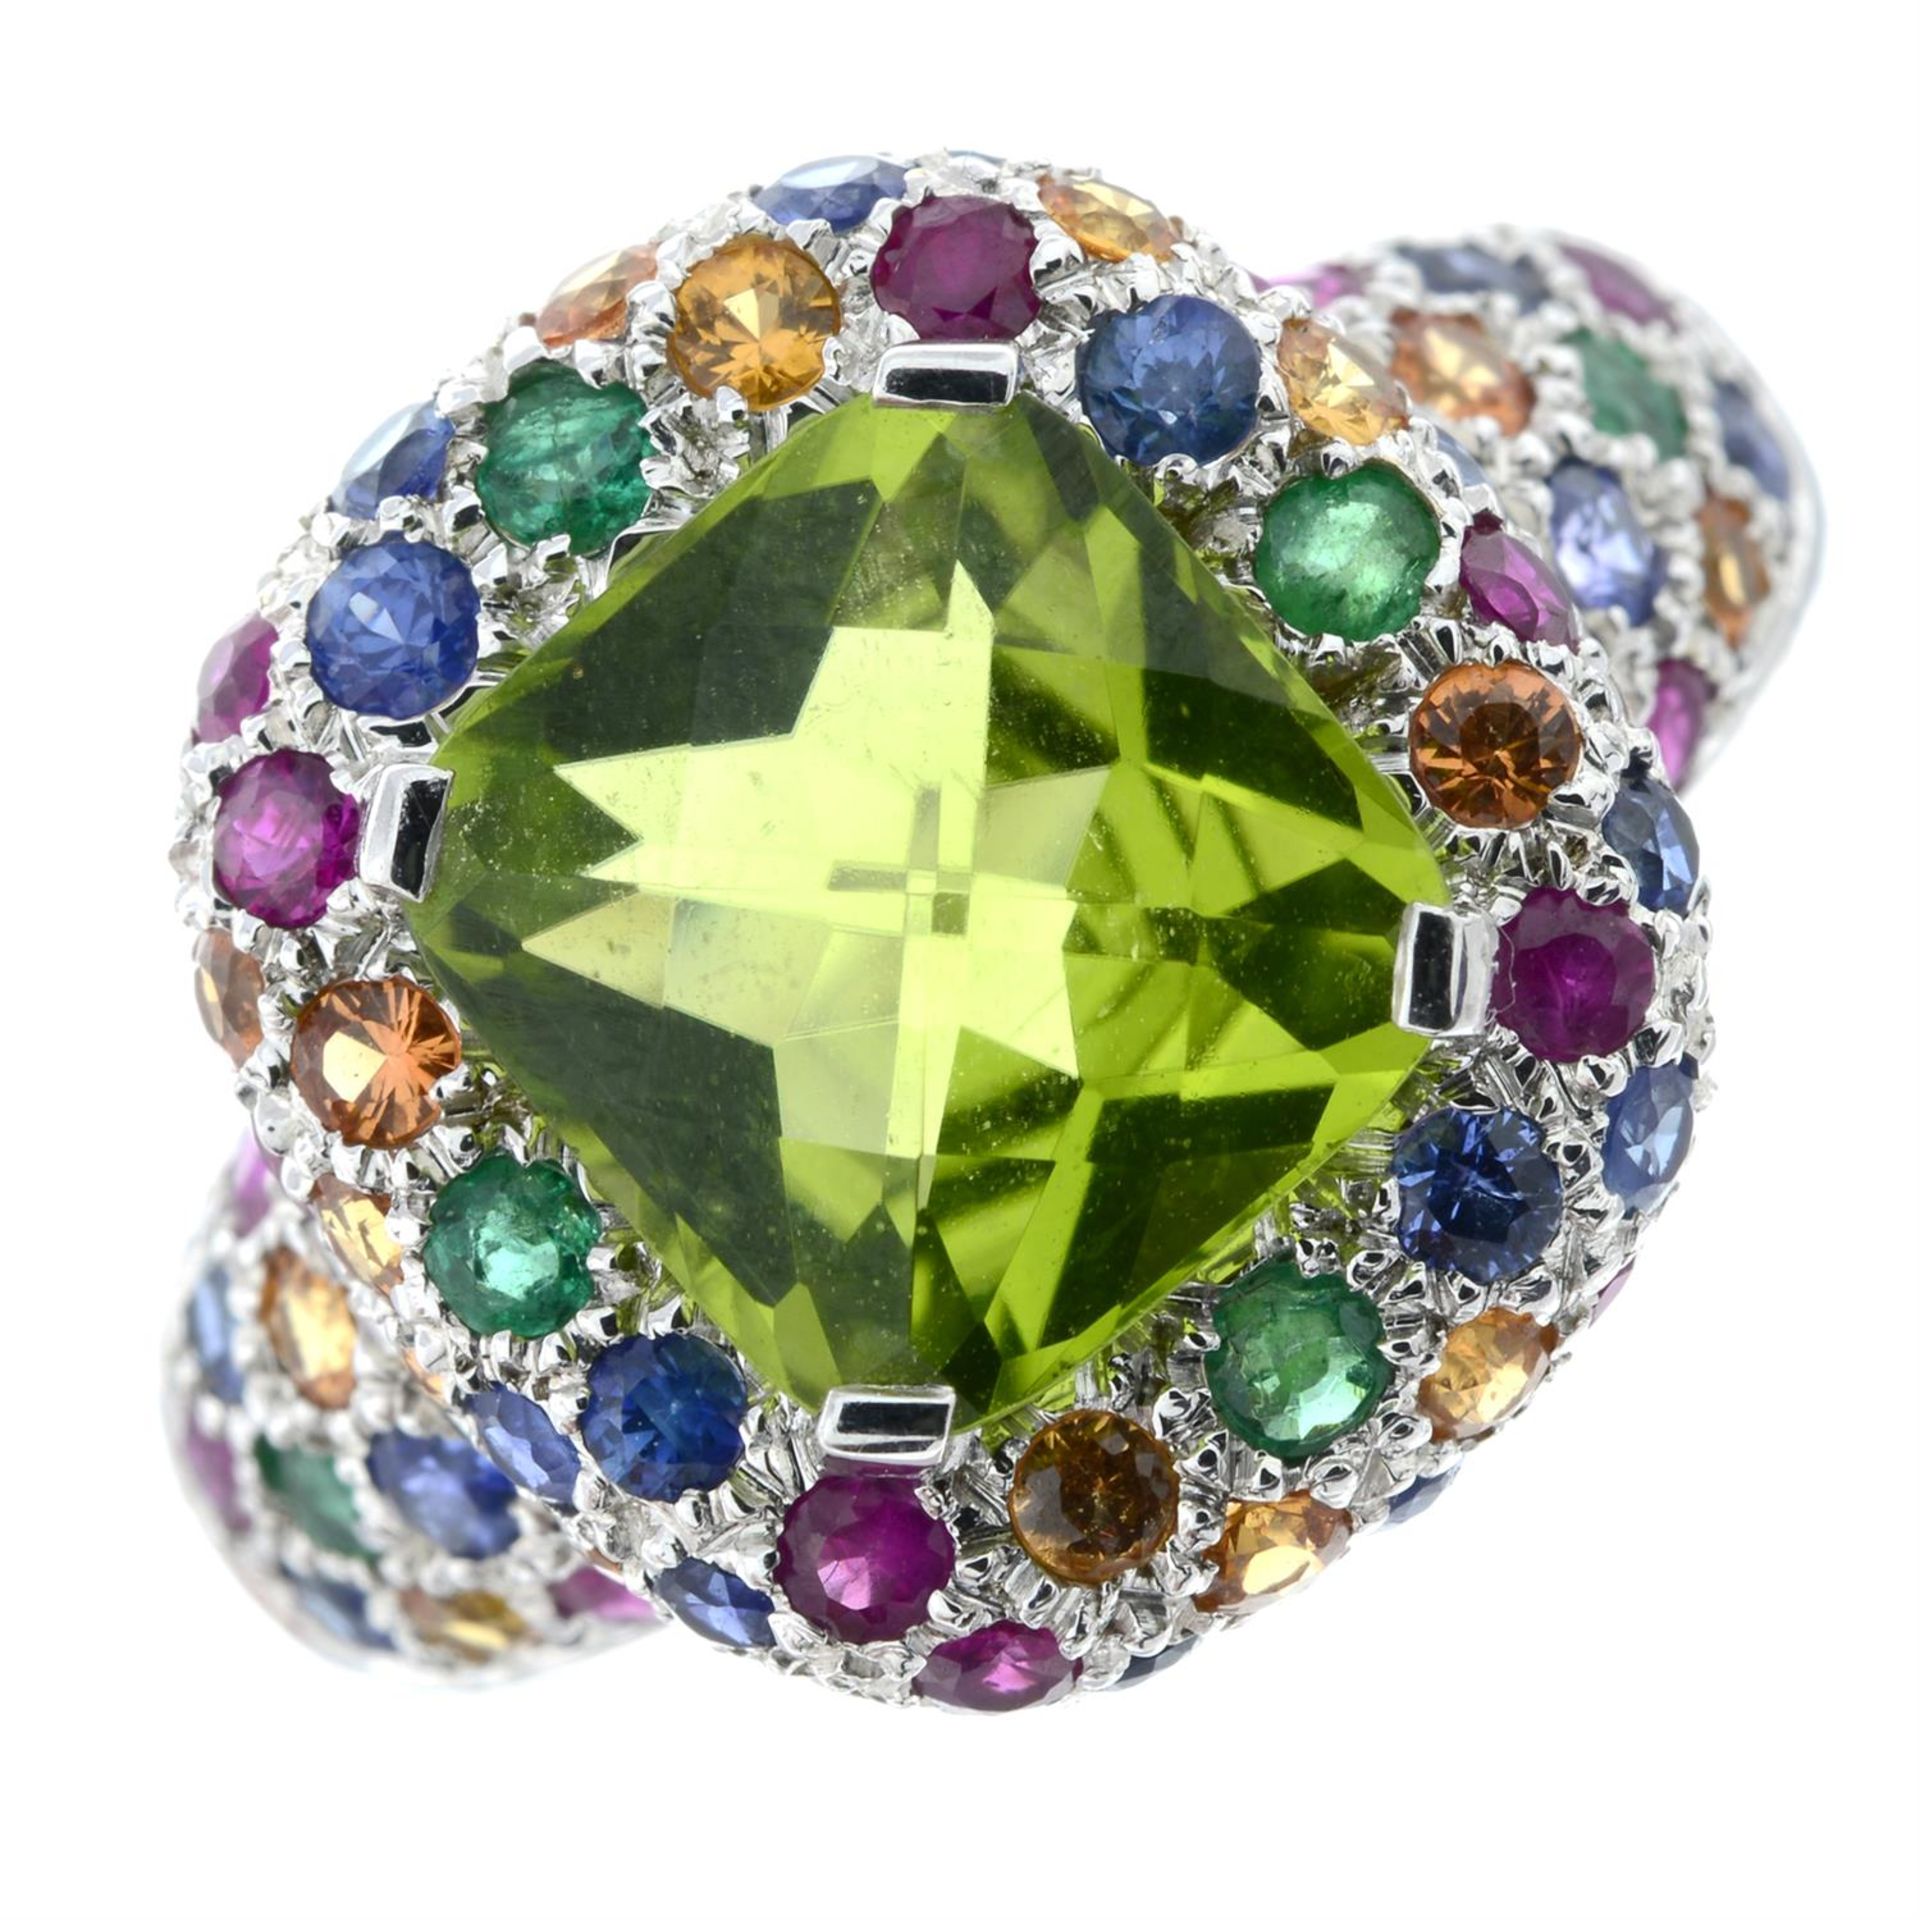 A peridot dress ring, with emerald, ruby, sapphire and topaz accents.